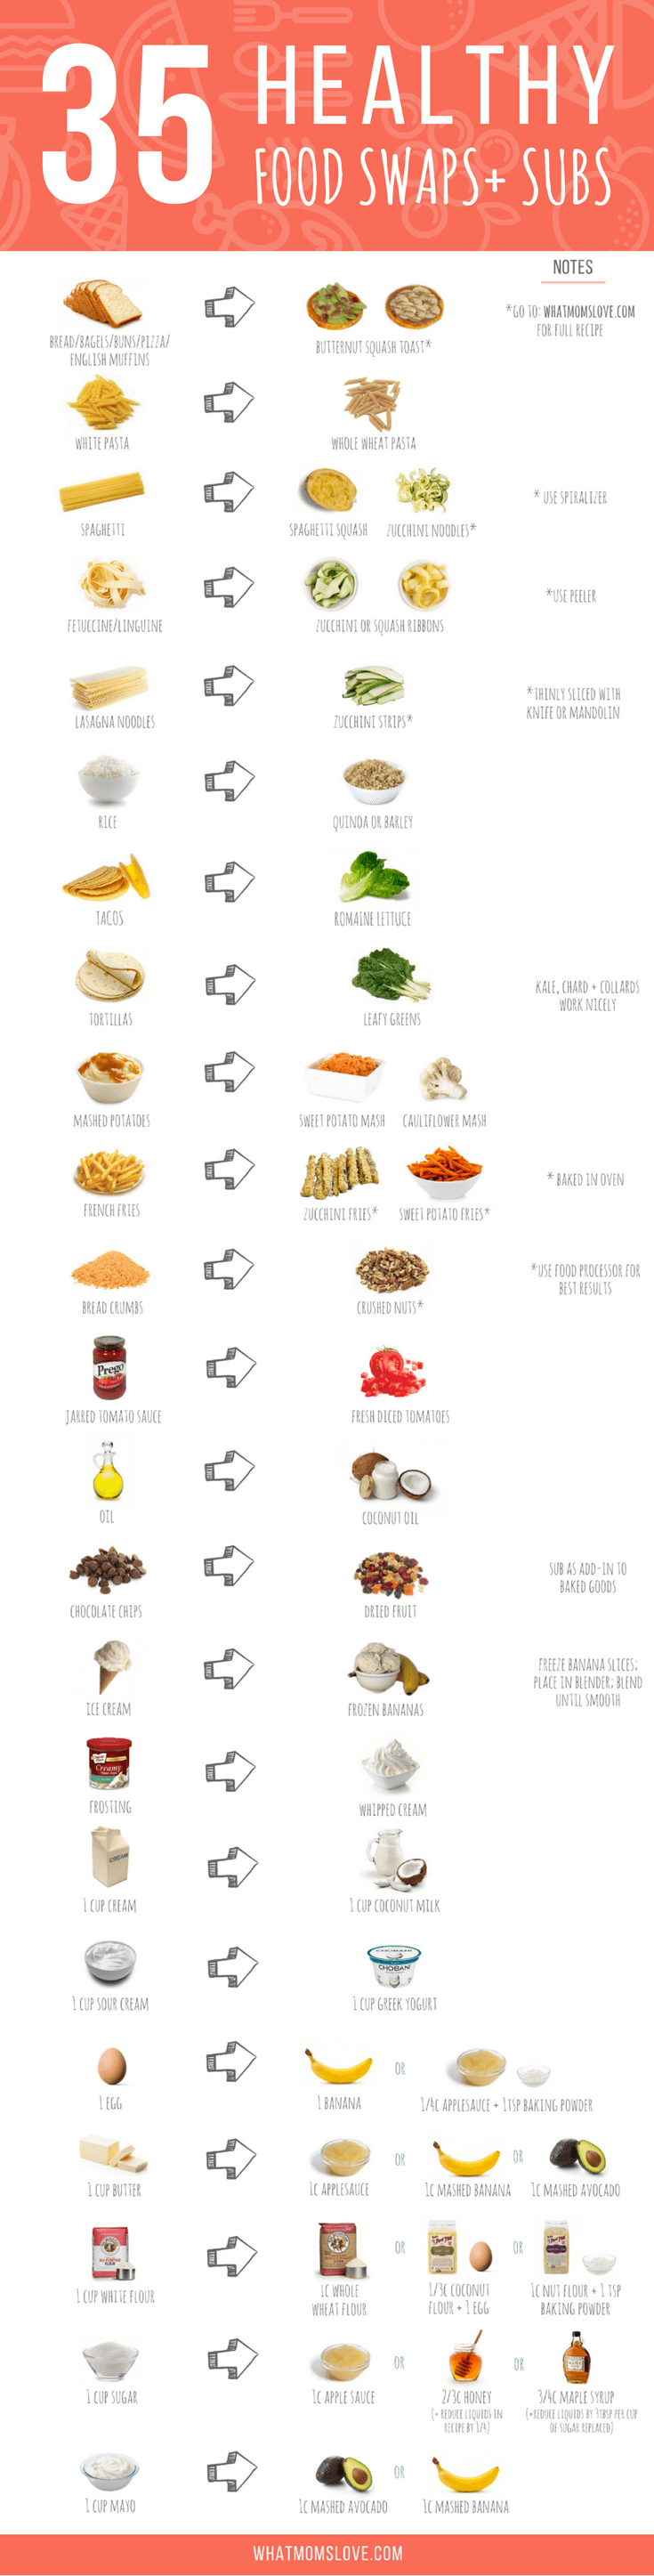 Cheap and healthy food substitutes